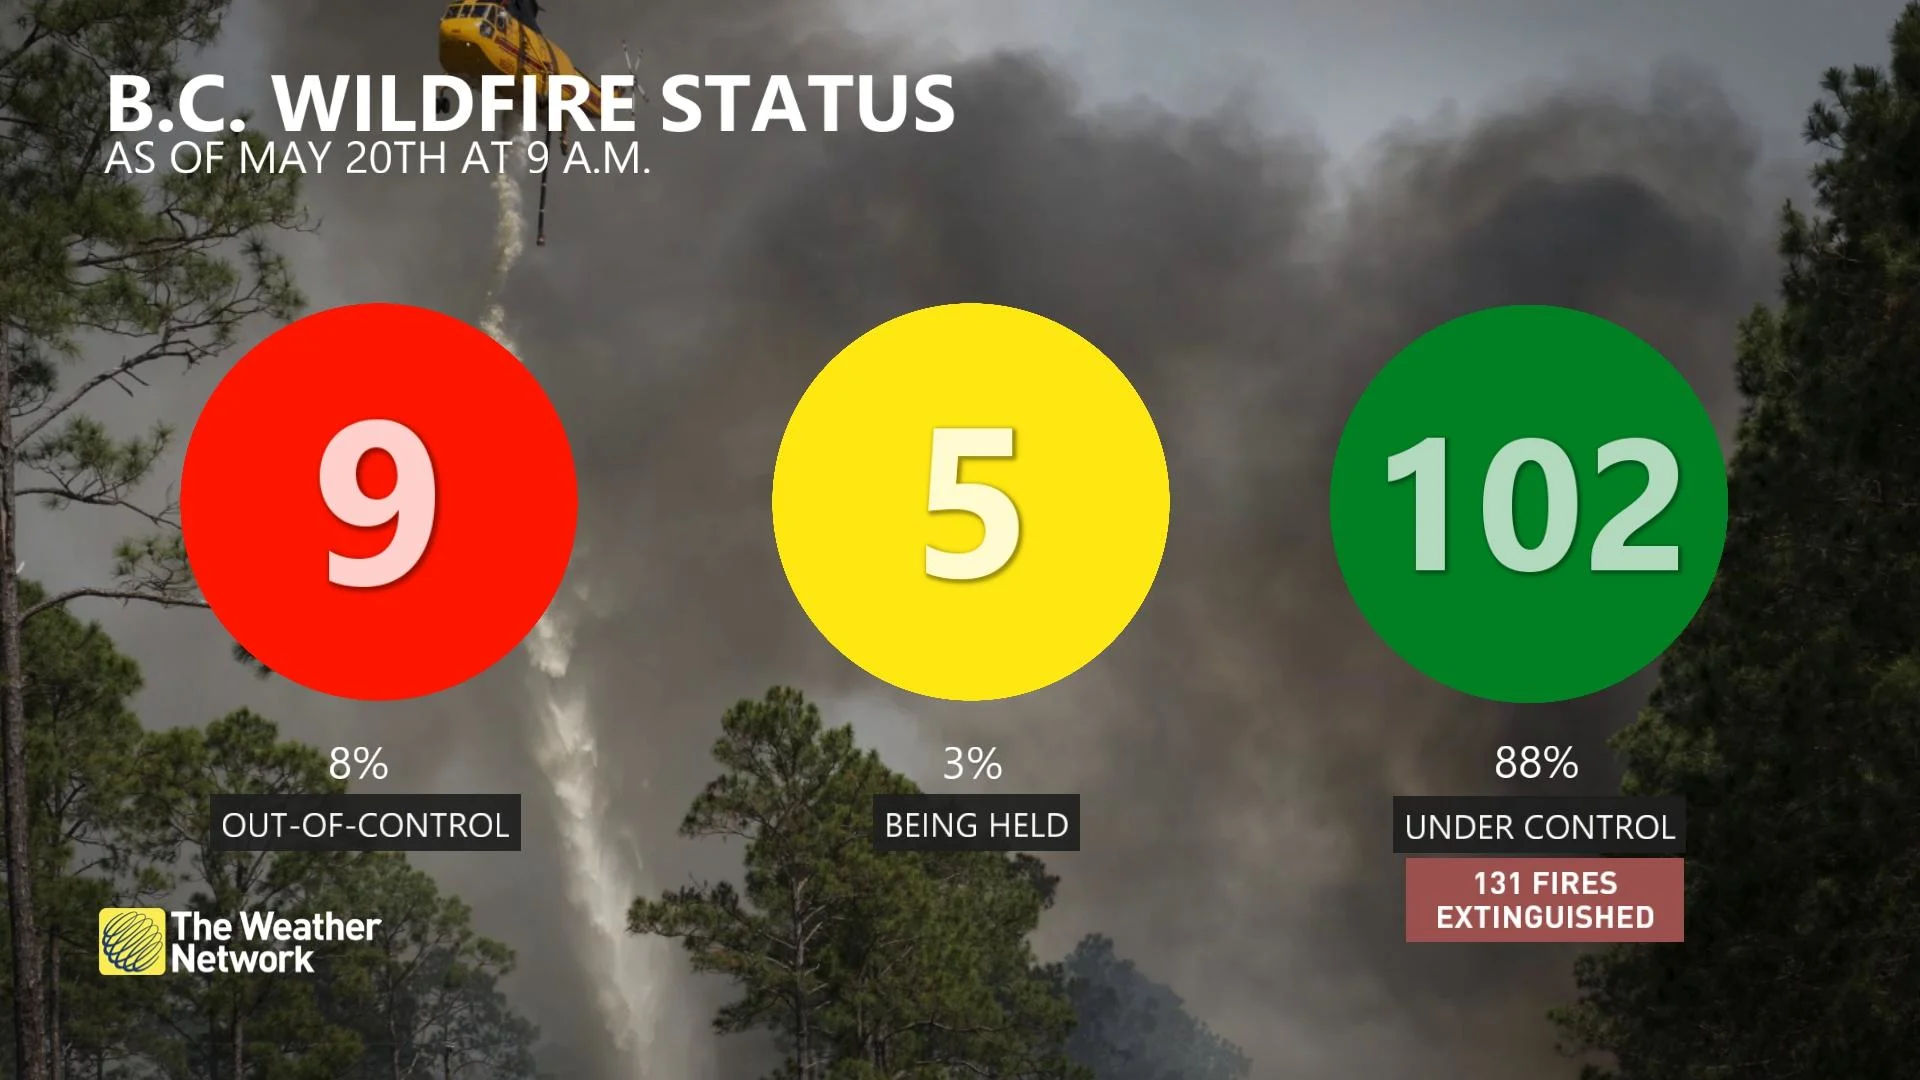 B.C. wildfire status as of May 20